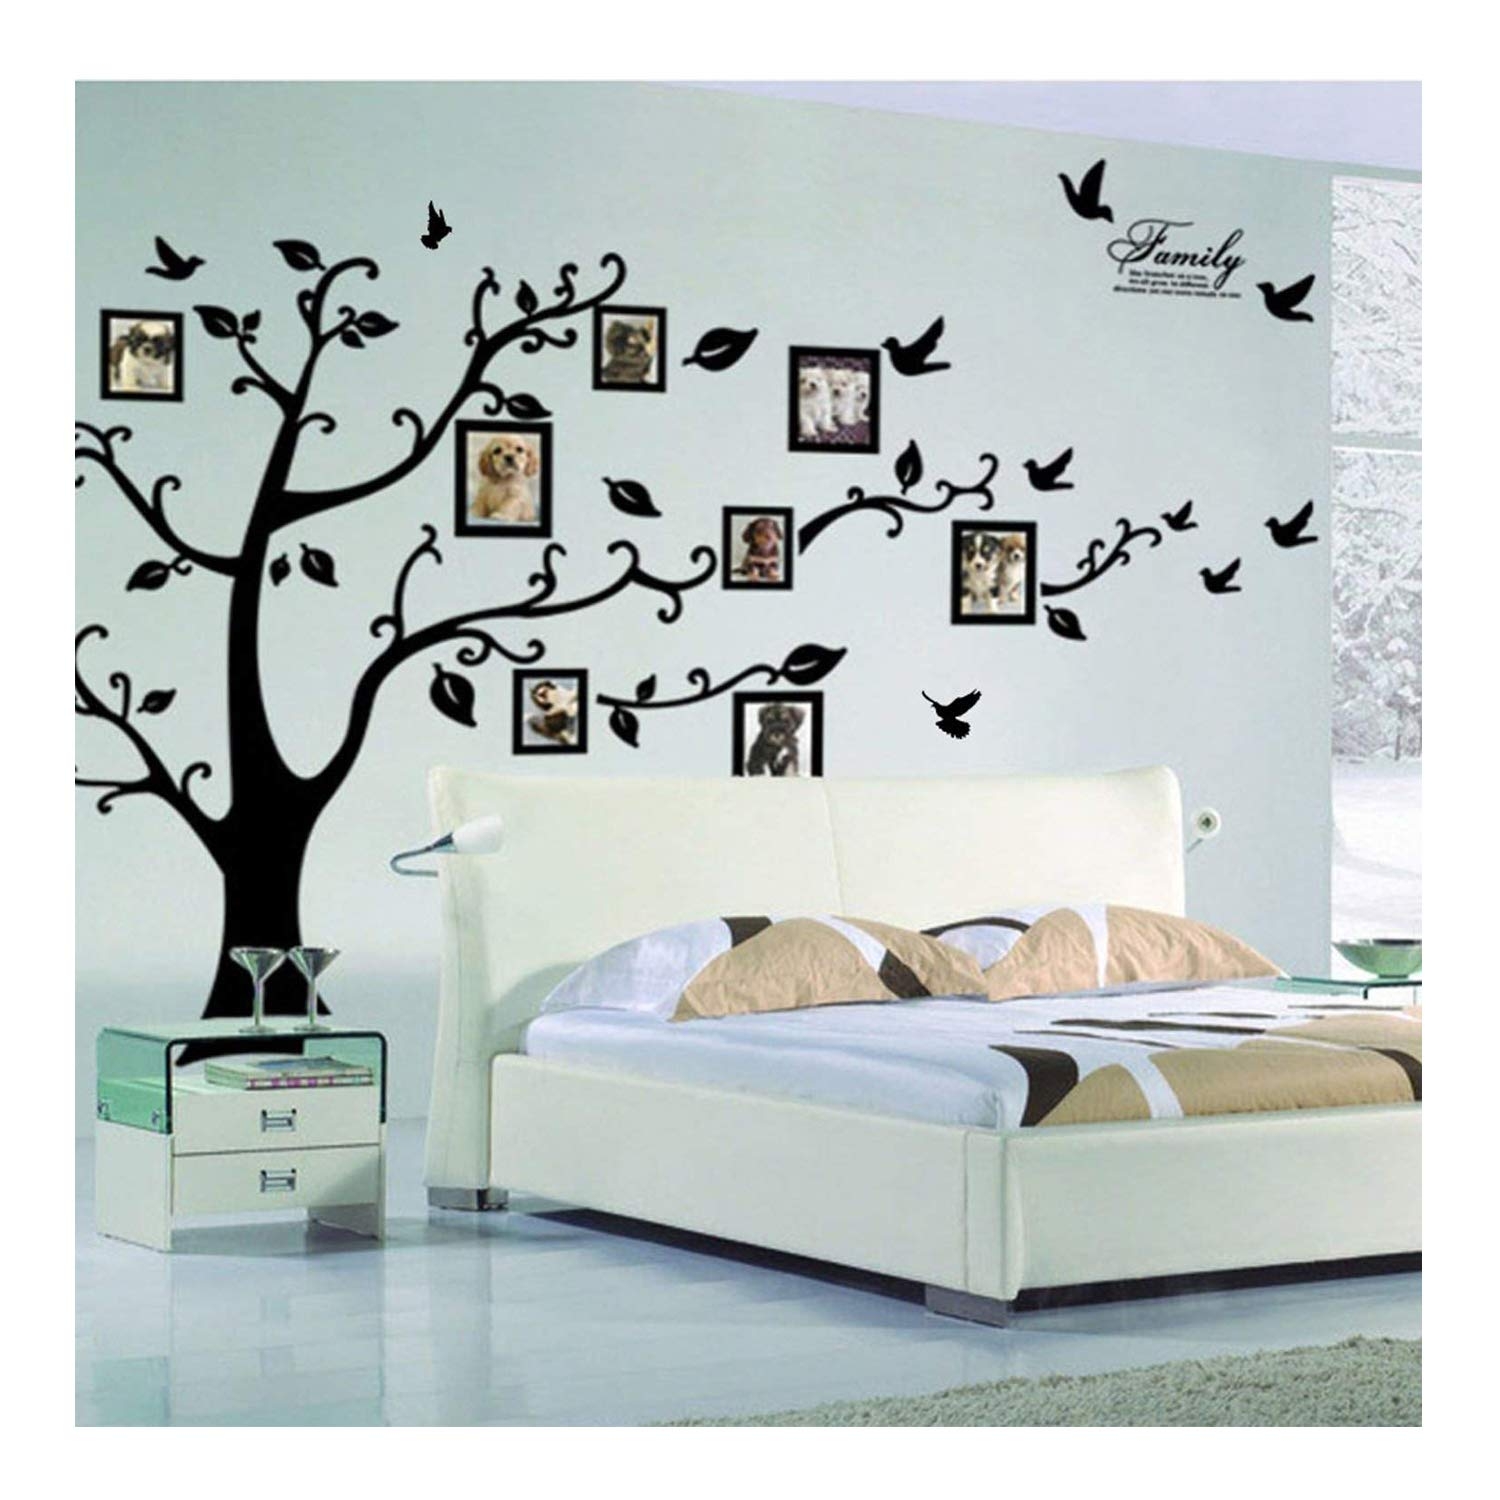 Large Family Tree Wall Decals 3D DIY Photo Frame Wall StickerS Mural Home Decor 